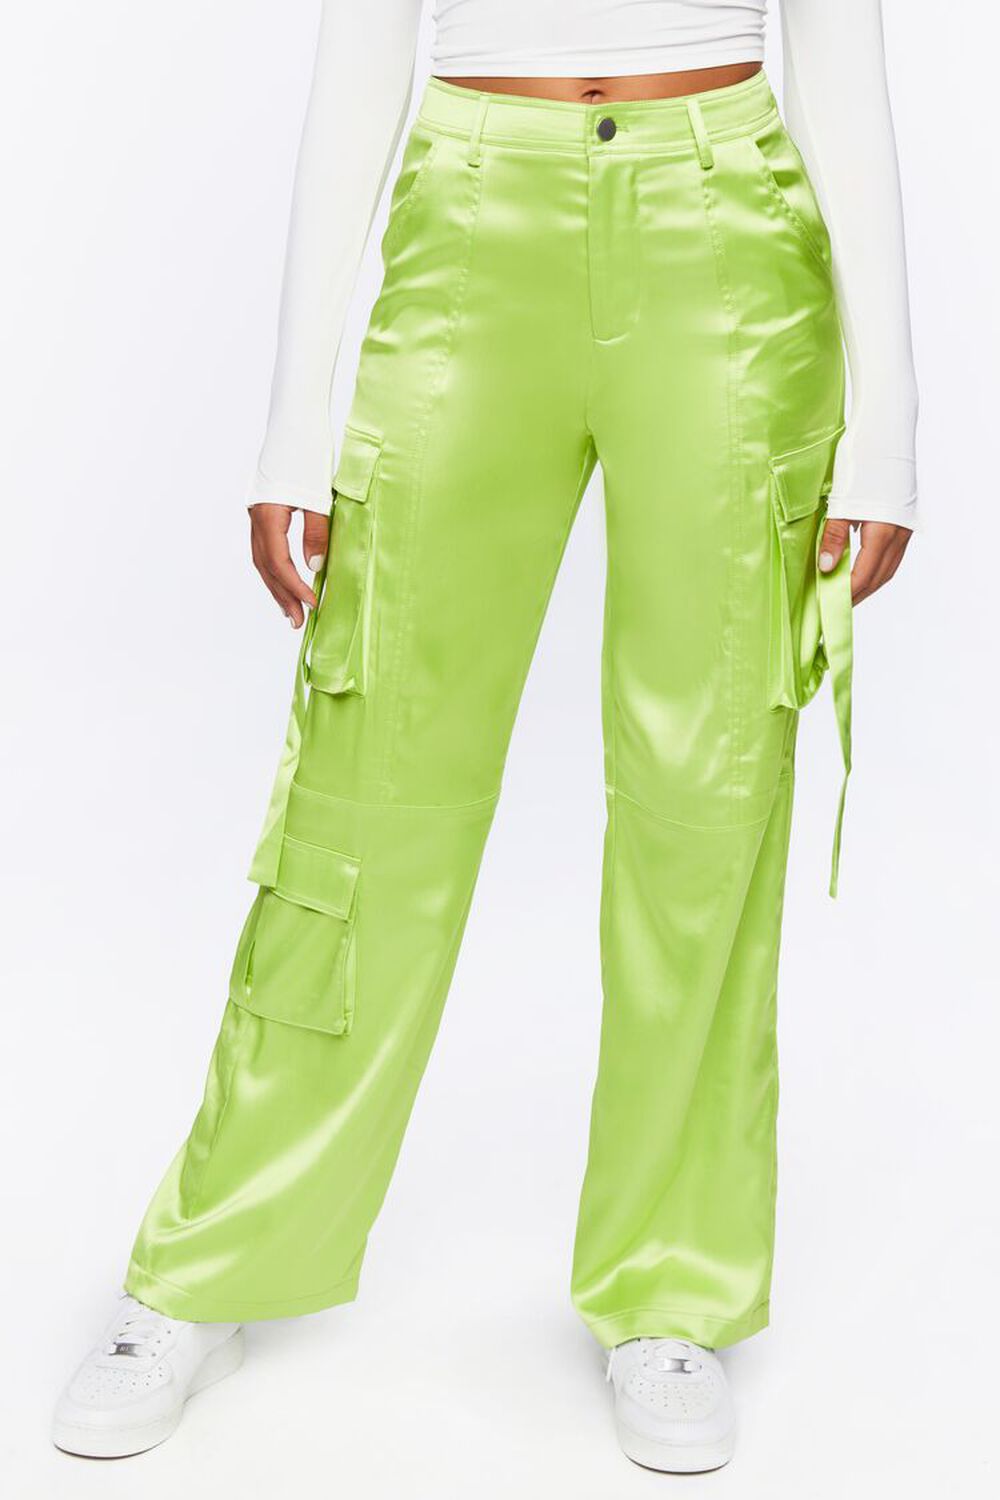 LIME Satin Cargo Mid-Rise Pants, image 2